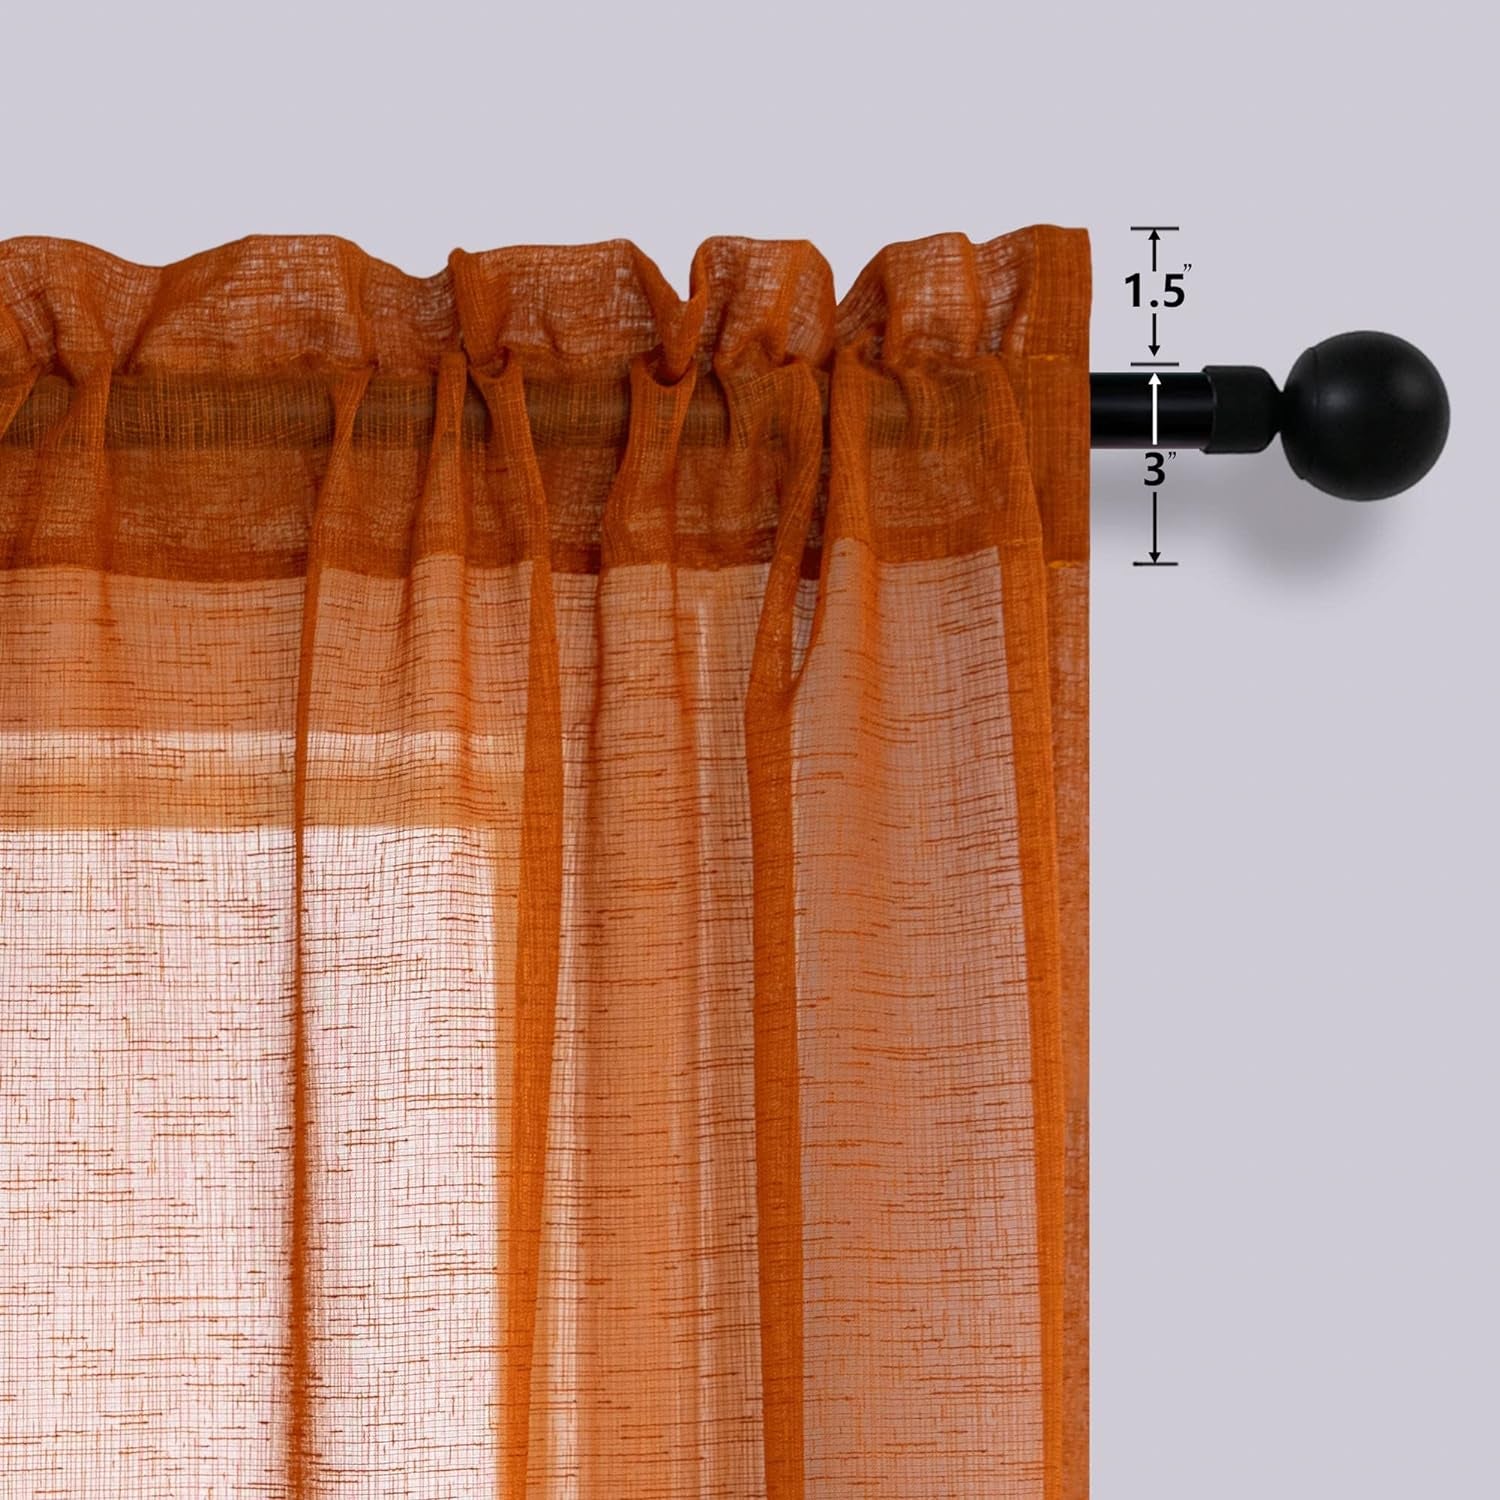 Burnt Orange Sheer Curtains 84 Inch Length for Bedroom 2 Panels Pumpkin Thanksgiving Day Rod Pocket Bohemian Semi Sheer Curtain Rustic Light Filtering Boho Curtains for Living Room 84 Inches Long  MRS.NATURALL TEXTILE   